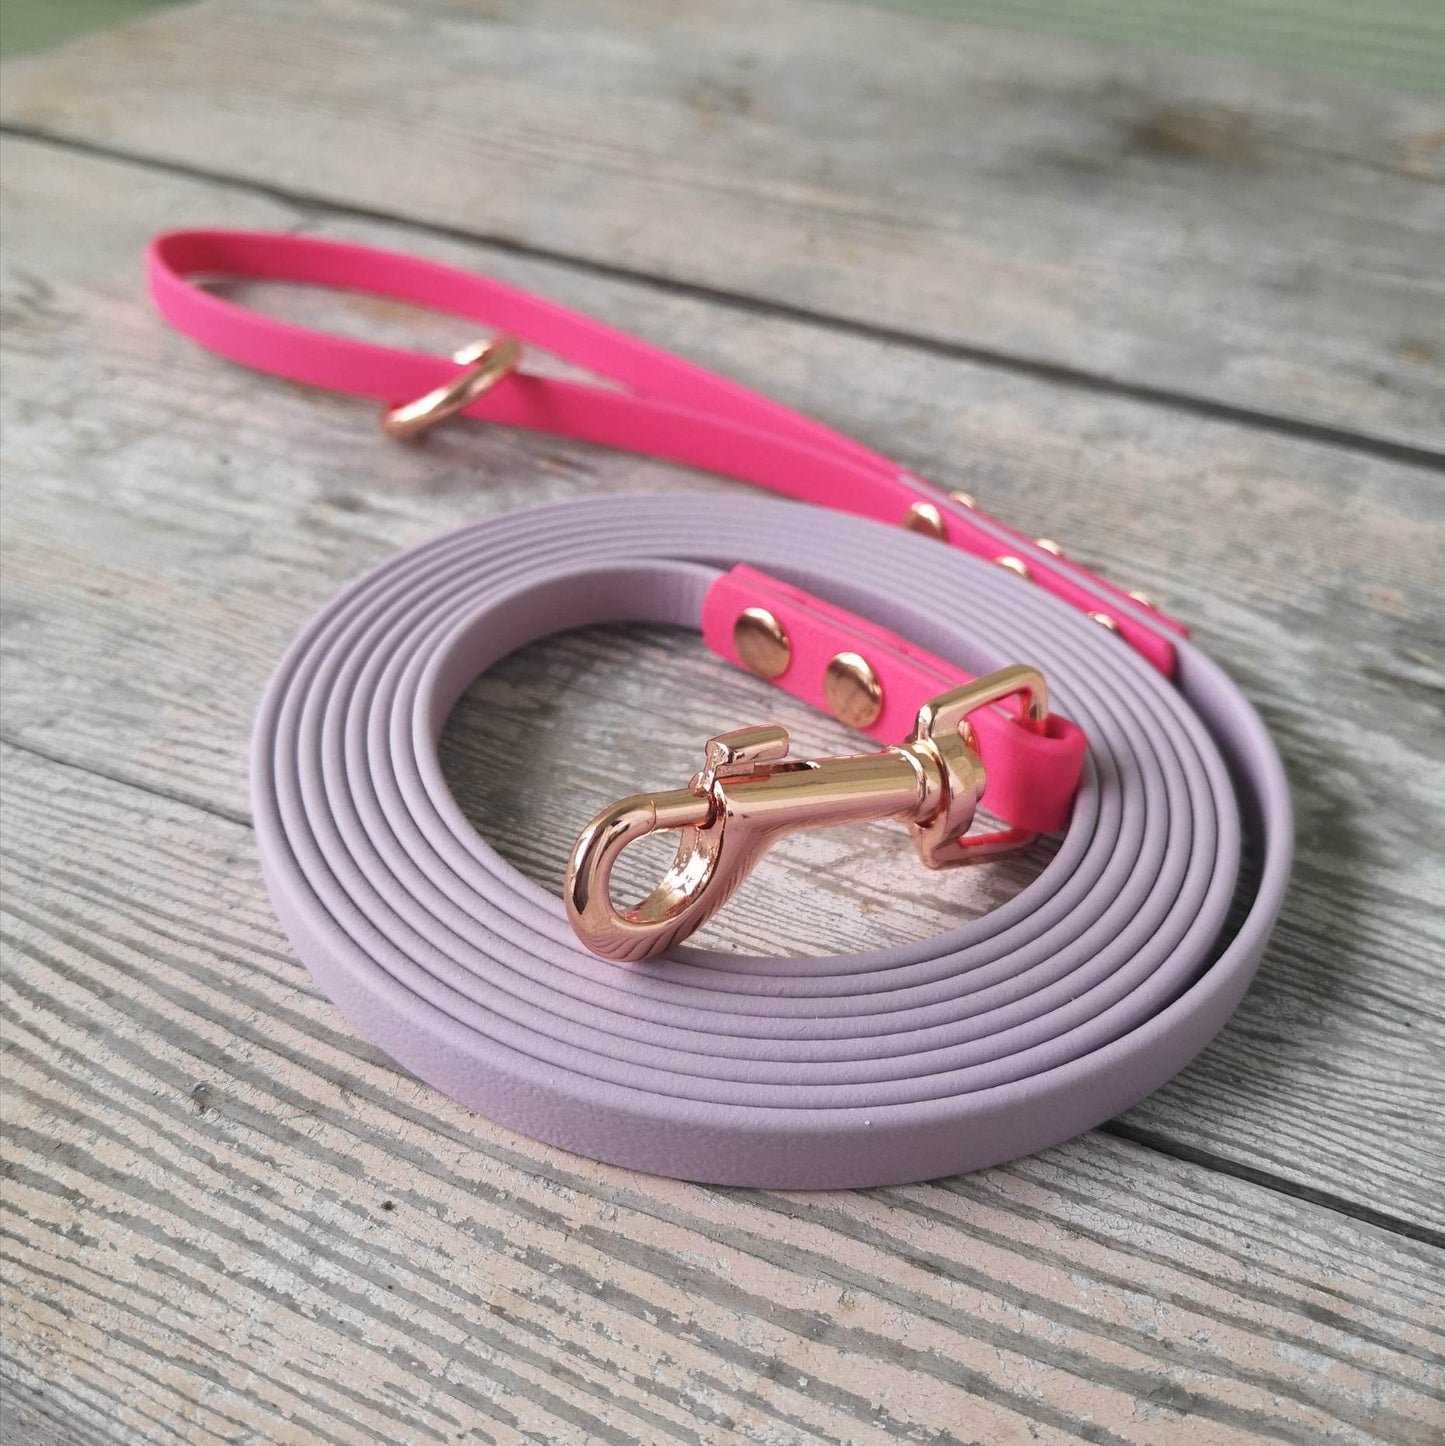 Lavender and magenta with rose gold hardware